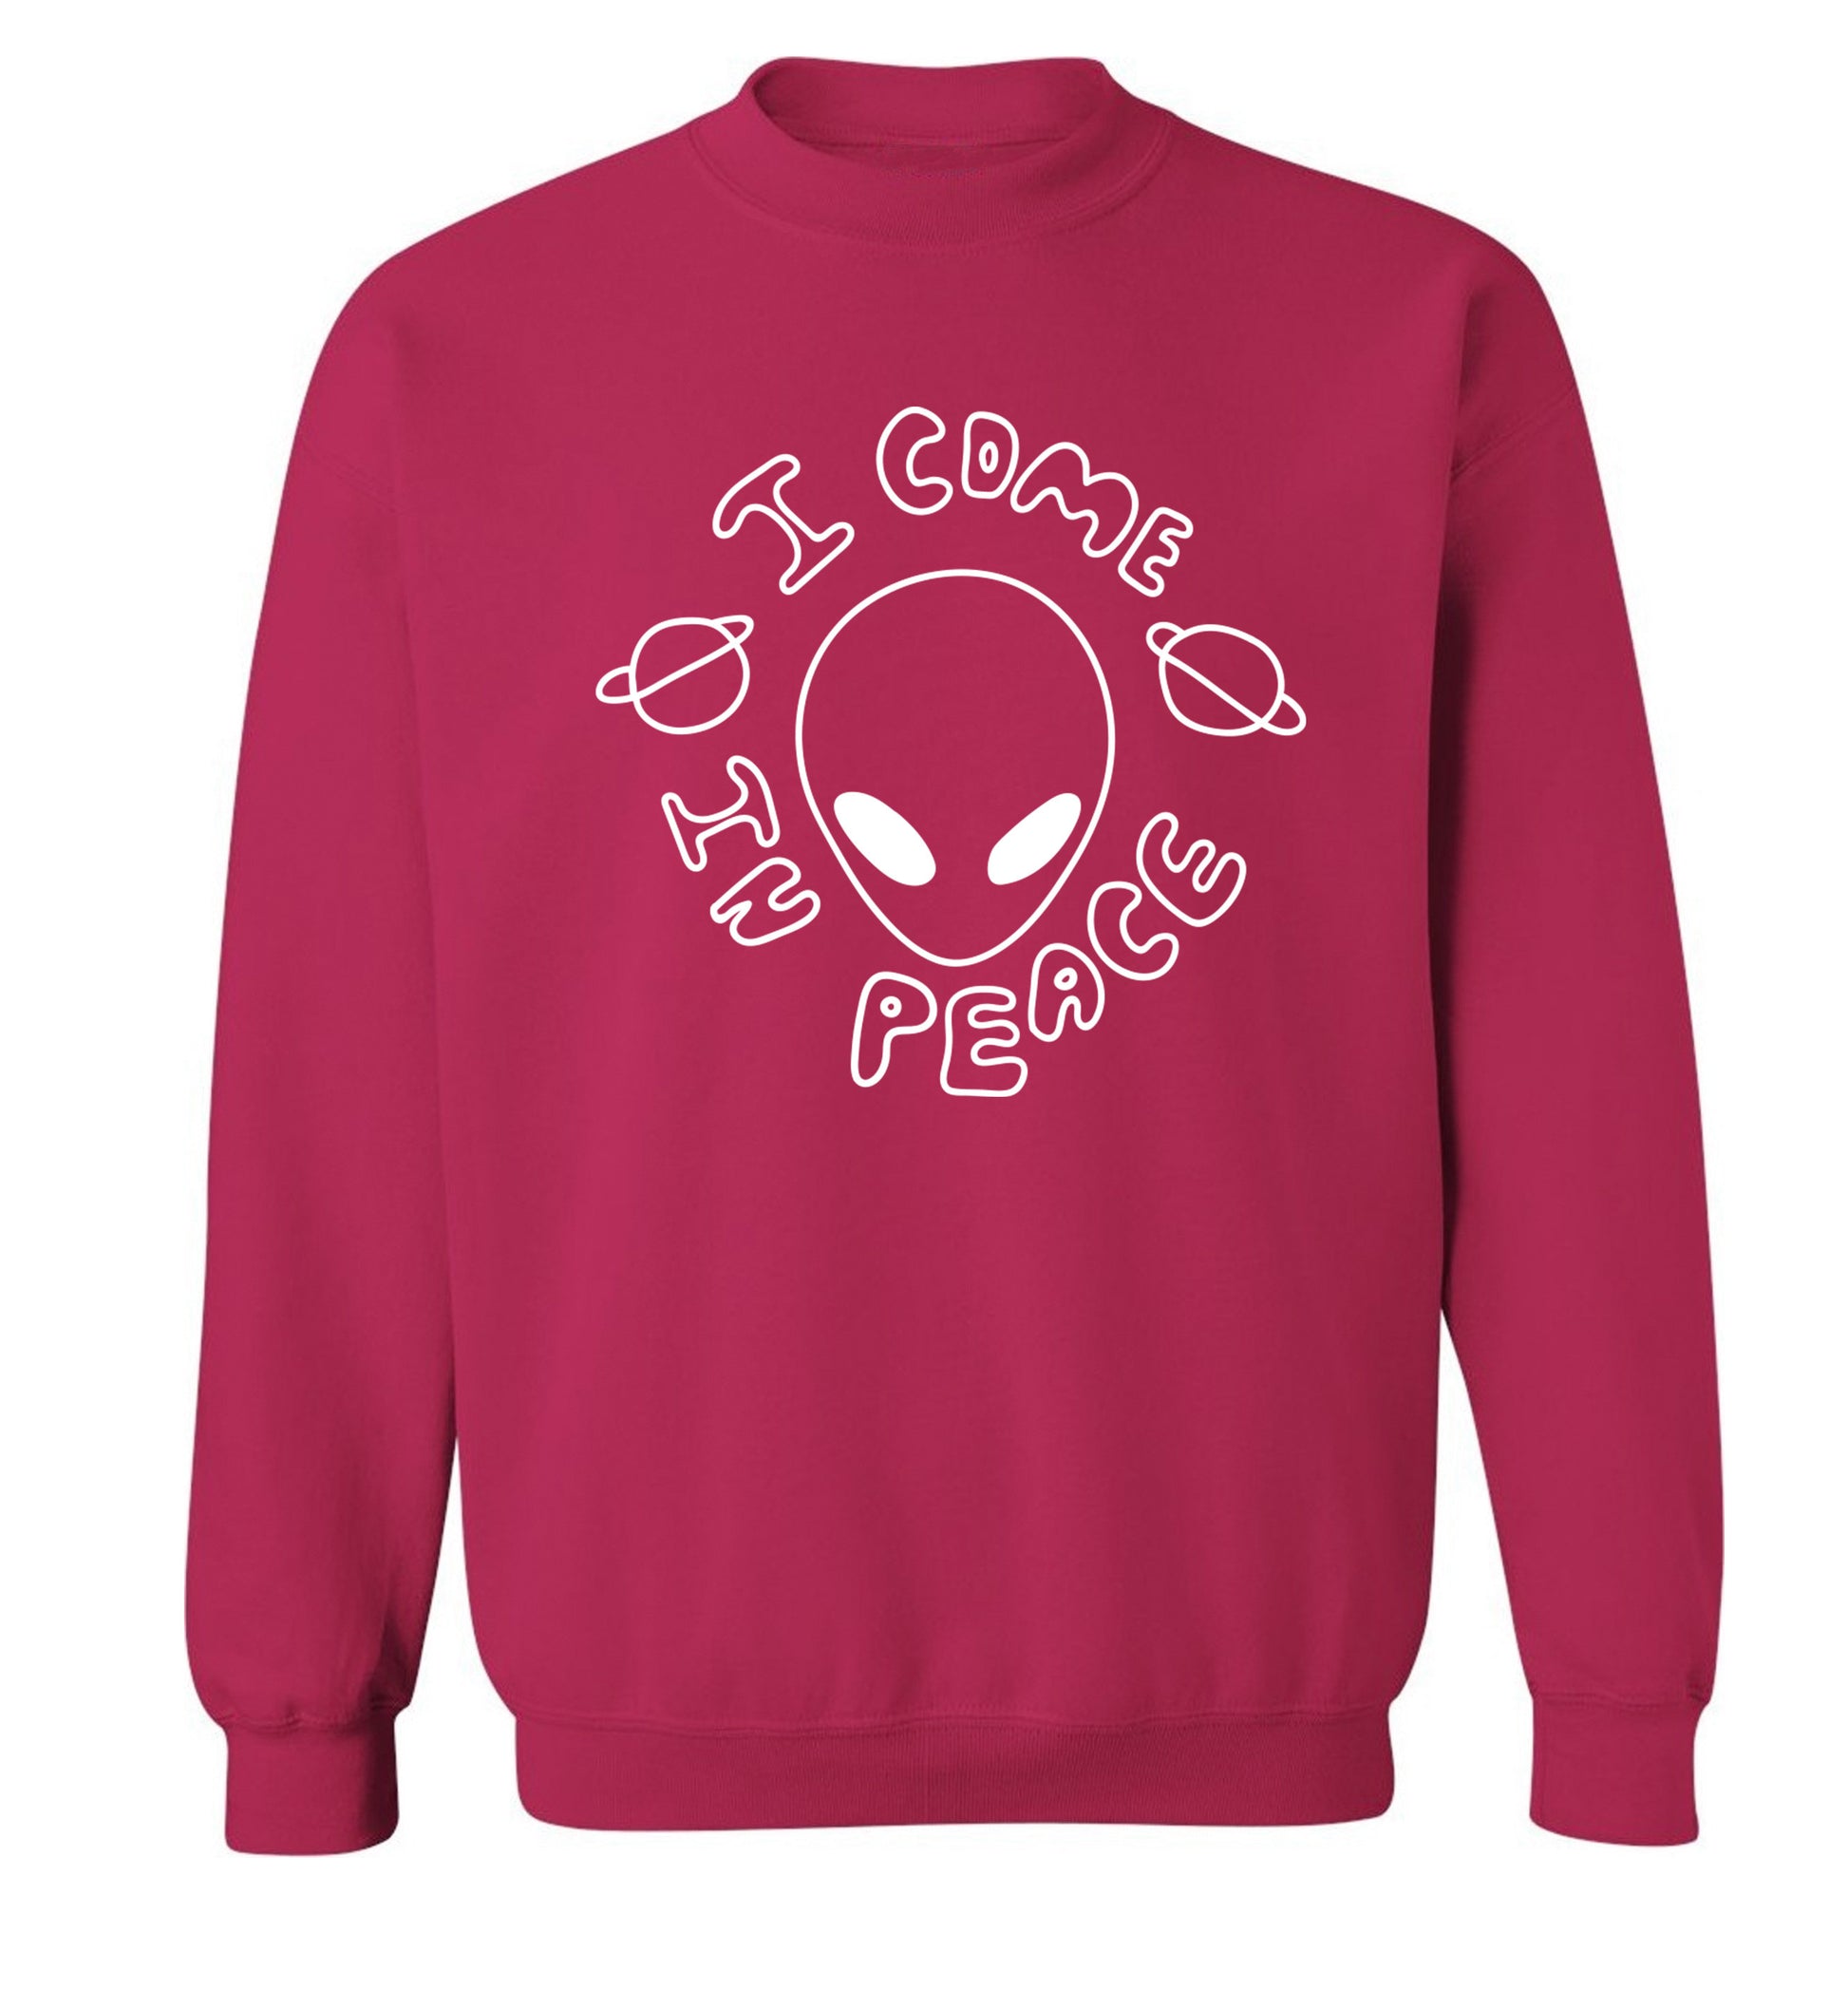 I come in peace Adult's unisex pink Sweater 2XL